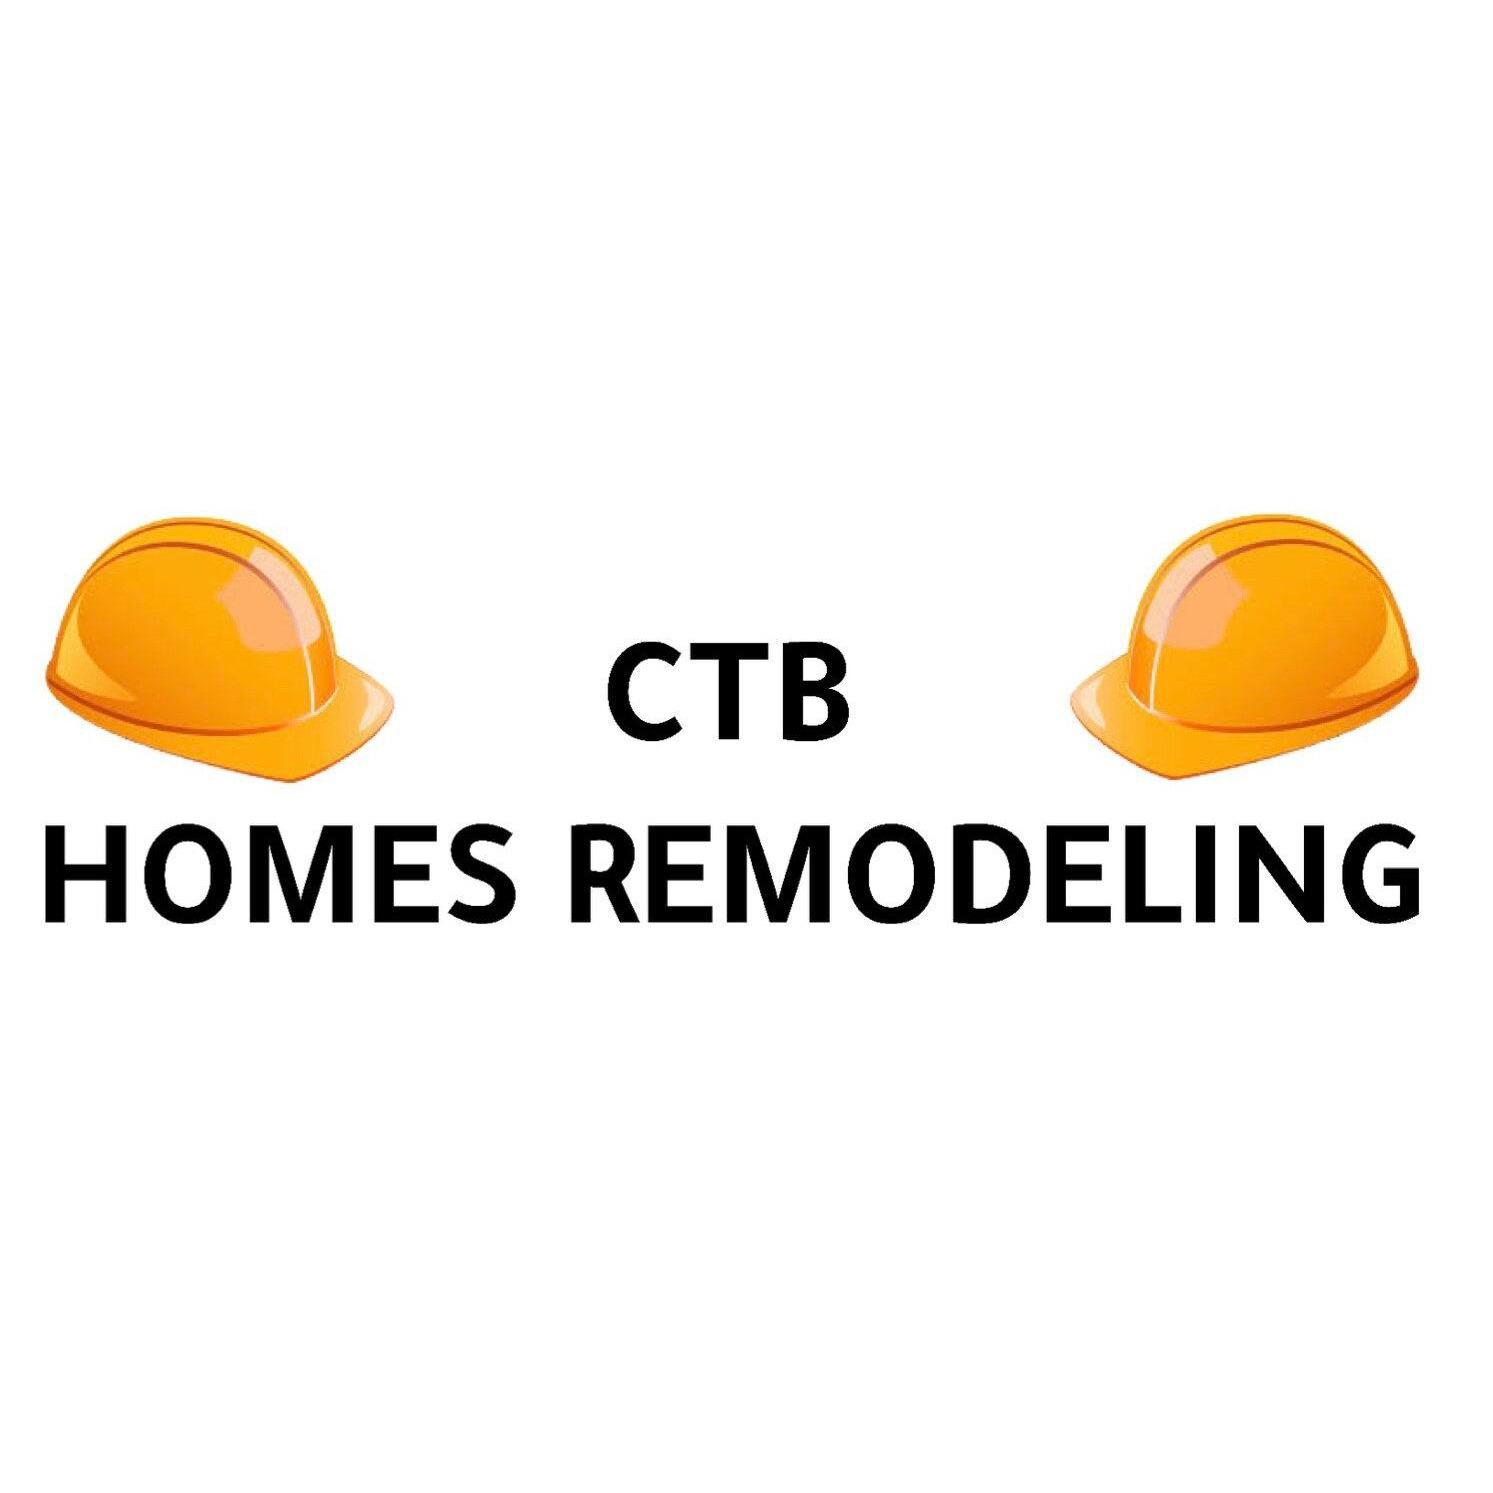 C.T.B. Homes Remodeling